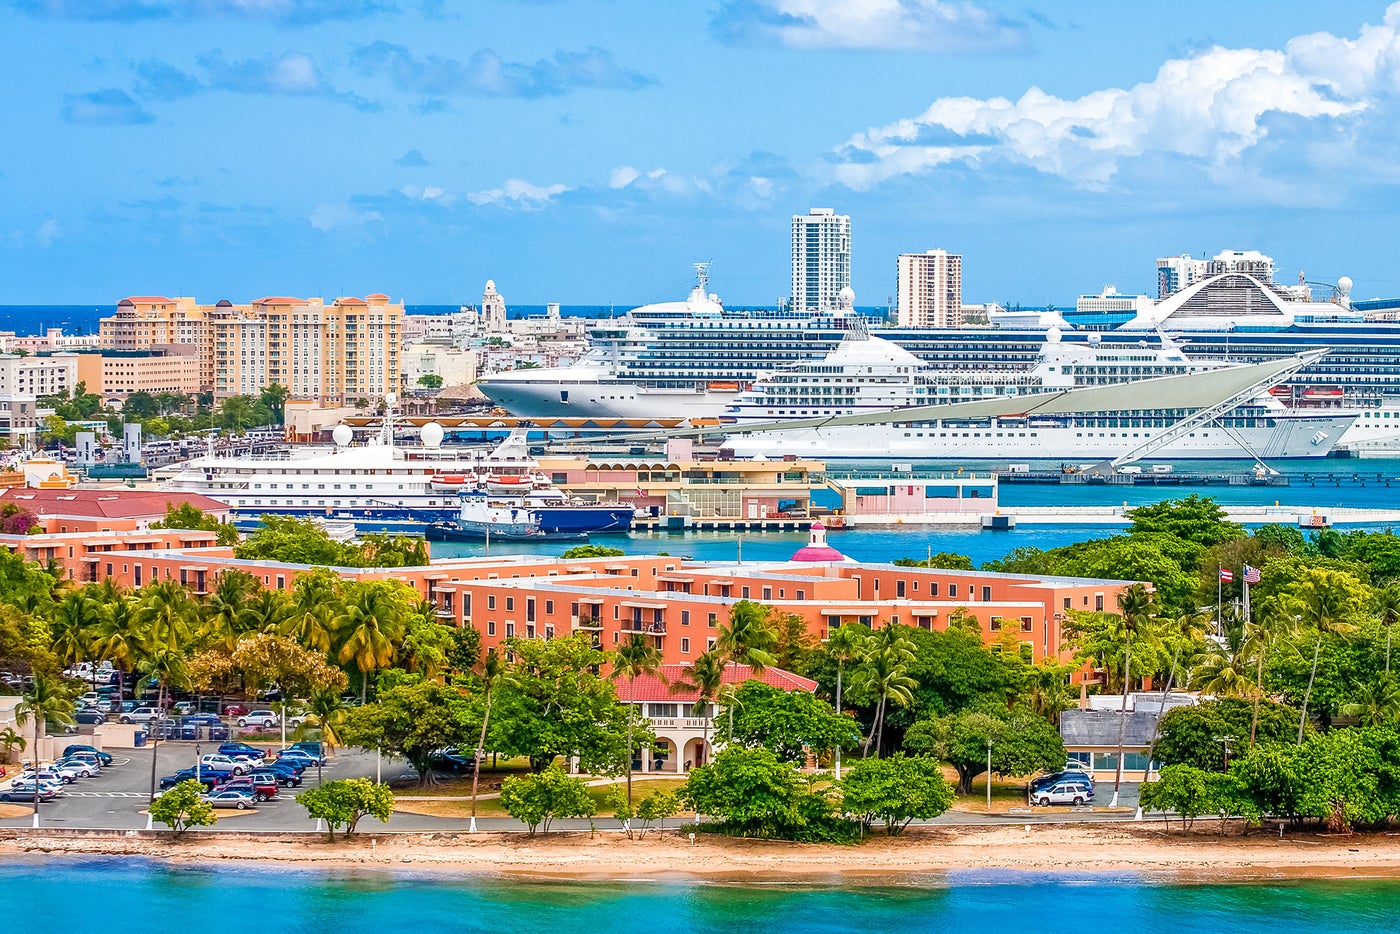 San Juan for the day: What to do while your cruise is in port